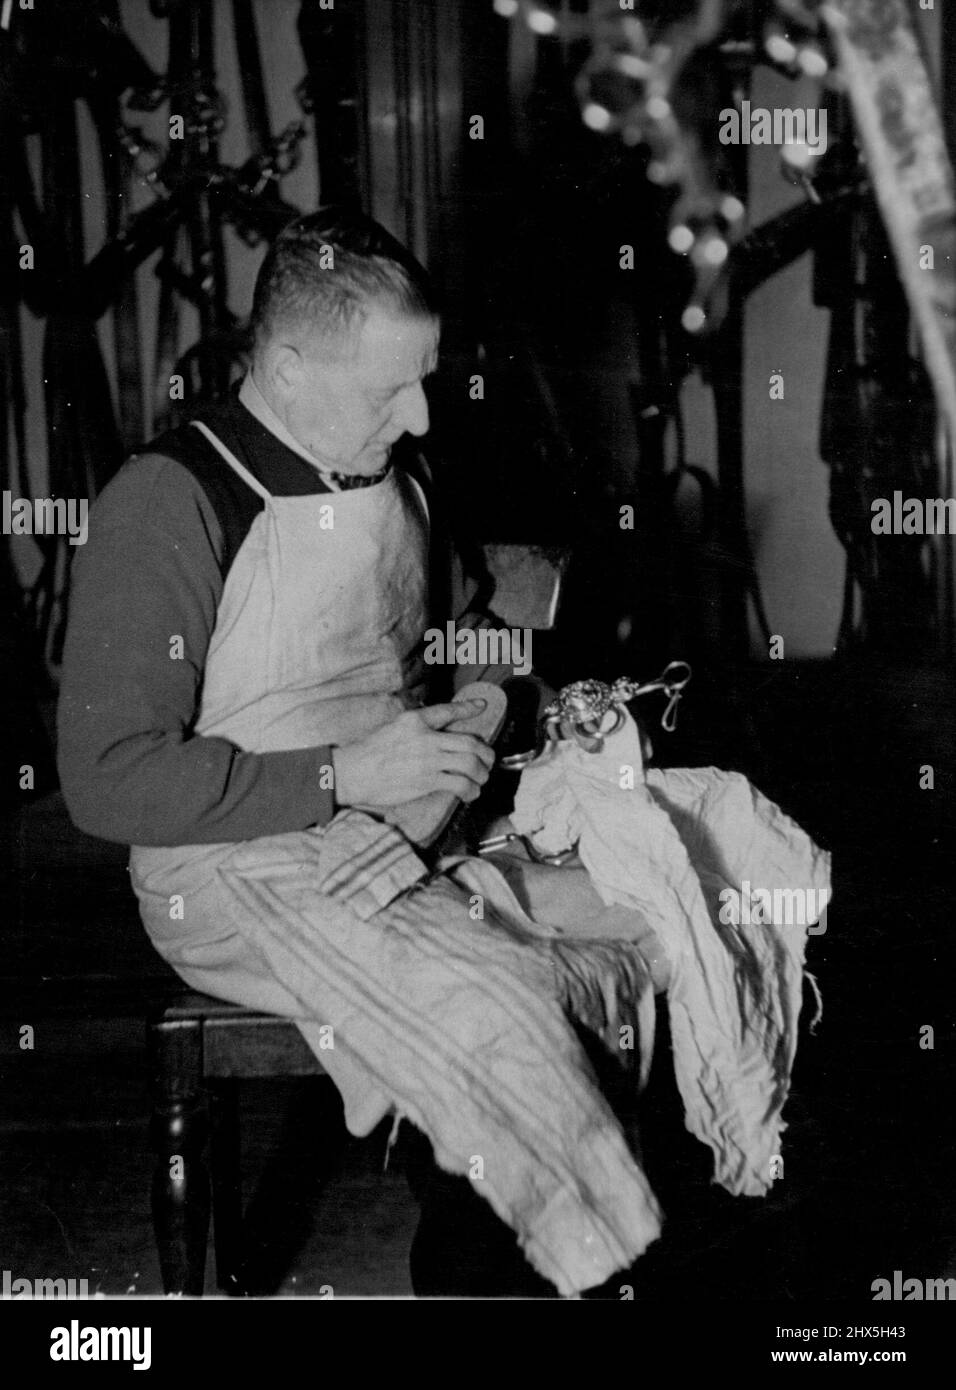 On His Majesty's Service. Coachman J.H. Clarke, 39 years in the Royal Household, knows all there is to know about cleaning the Royal harness. With Mr Croft he is responsible for the cleanliness of the museum pieces, and the furniture in the State Harness Room. May 22, 1946. Stock Photo